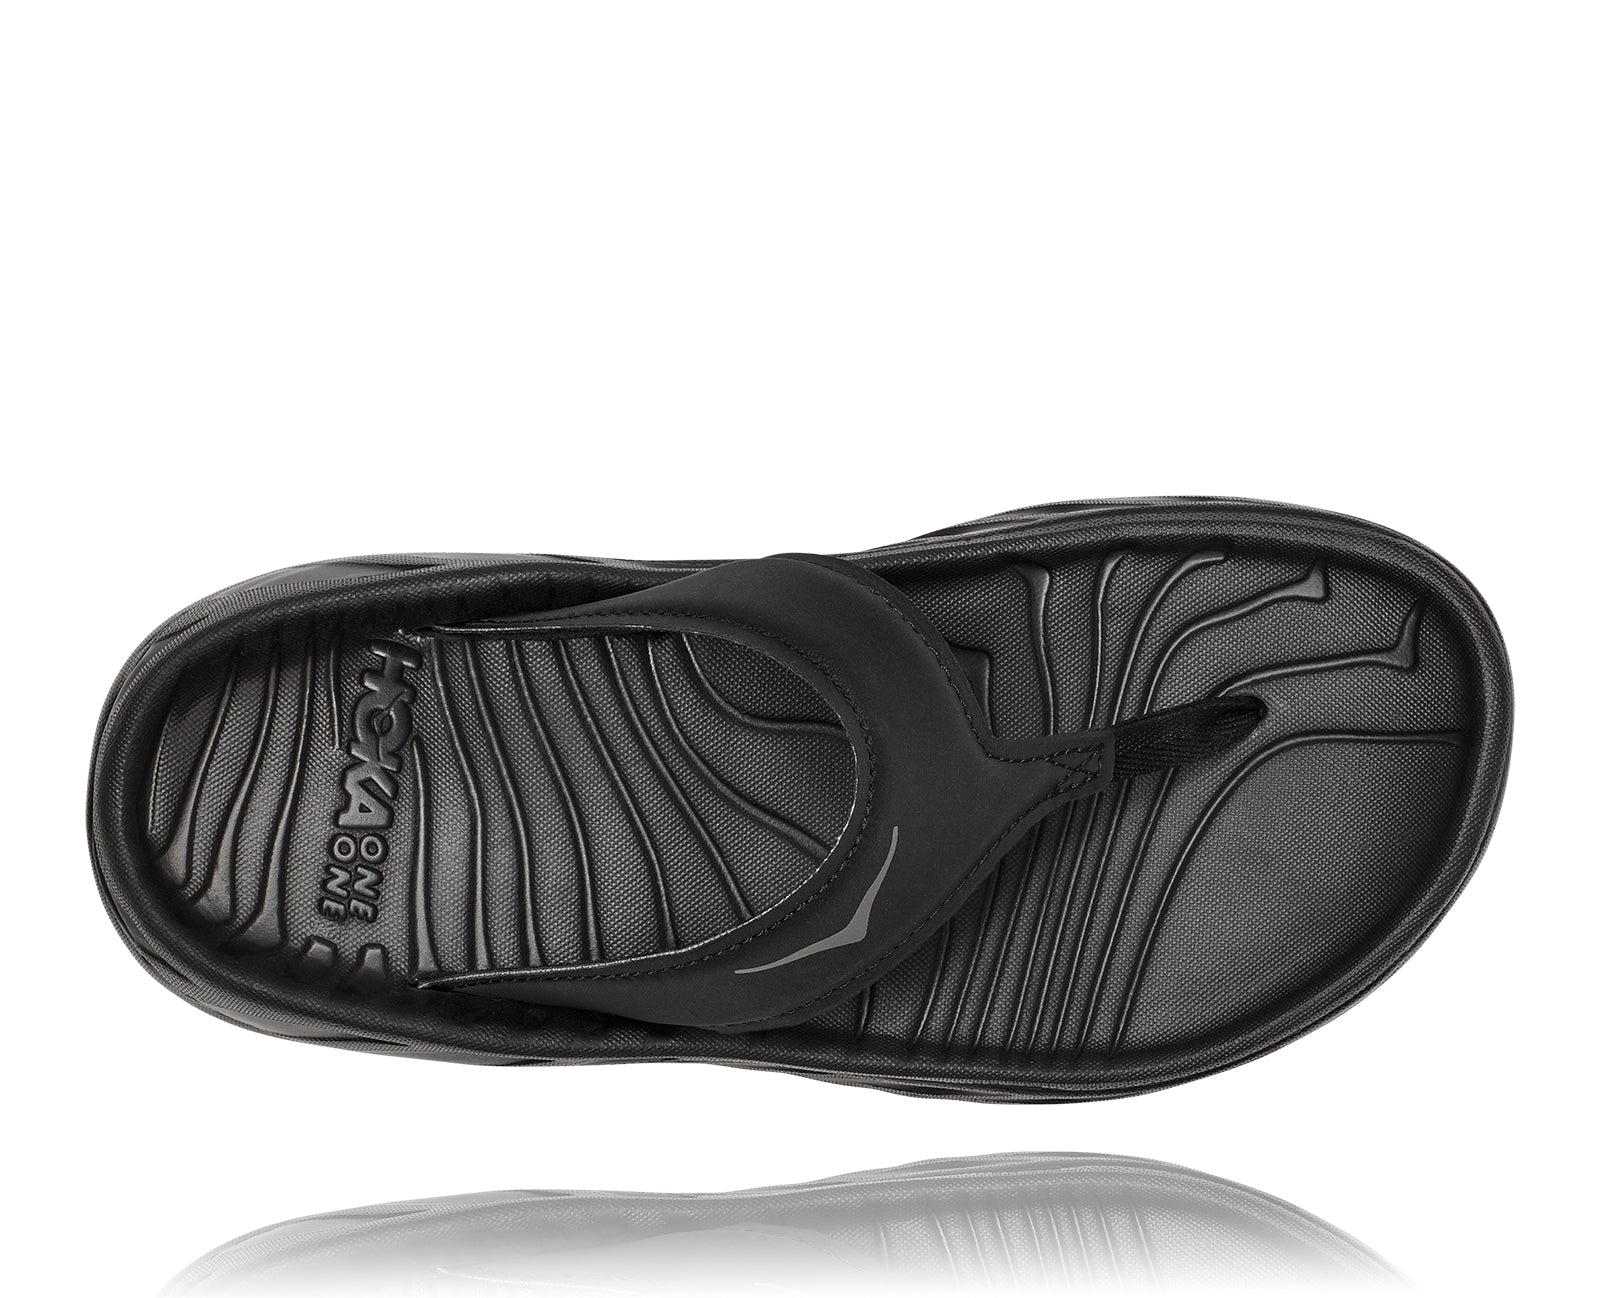 Top view of the Women's HOKA Ora Recovery Flip in the color Black/Dark Gull Gray